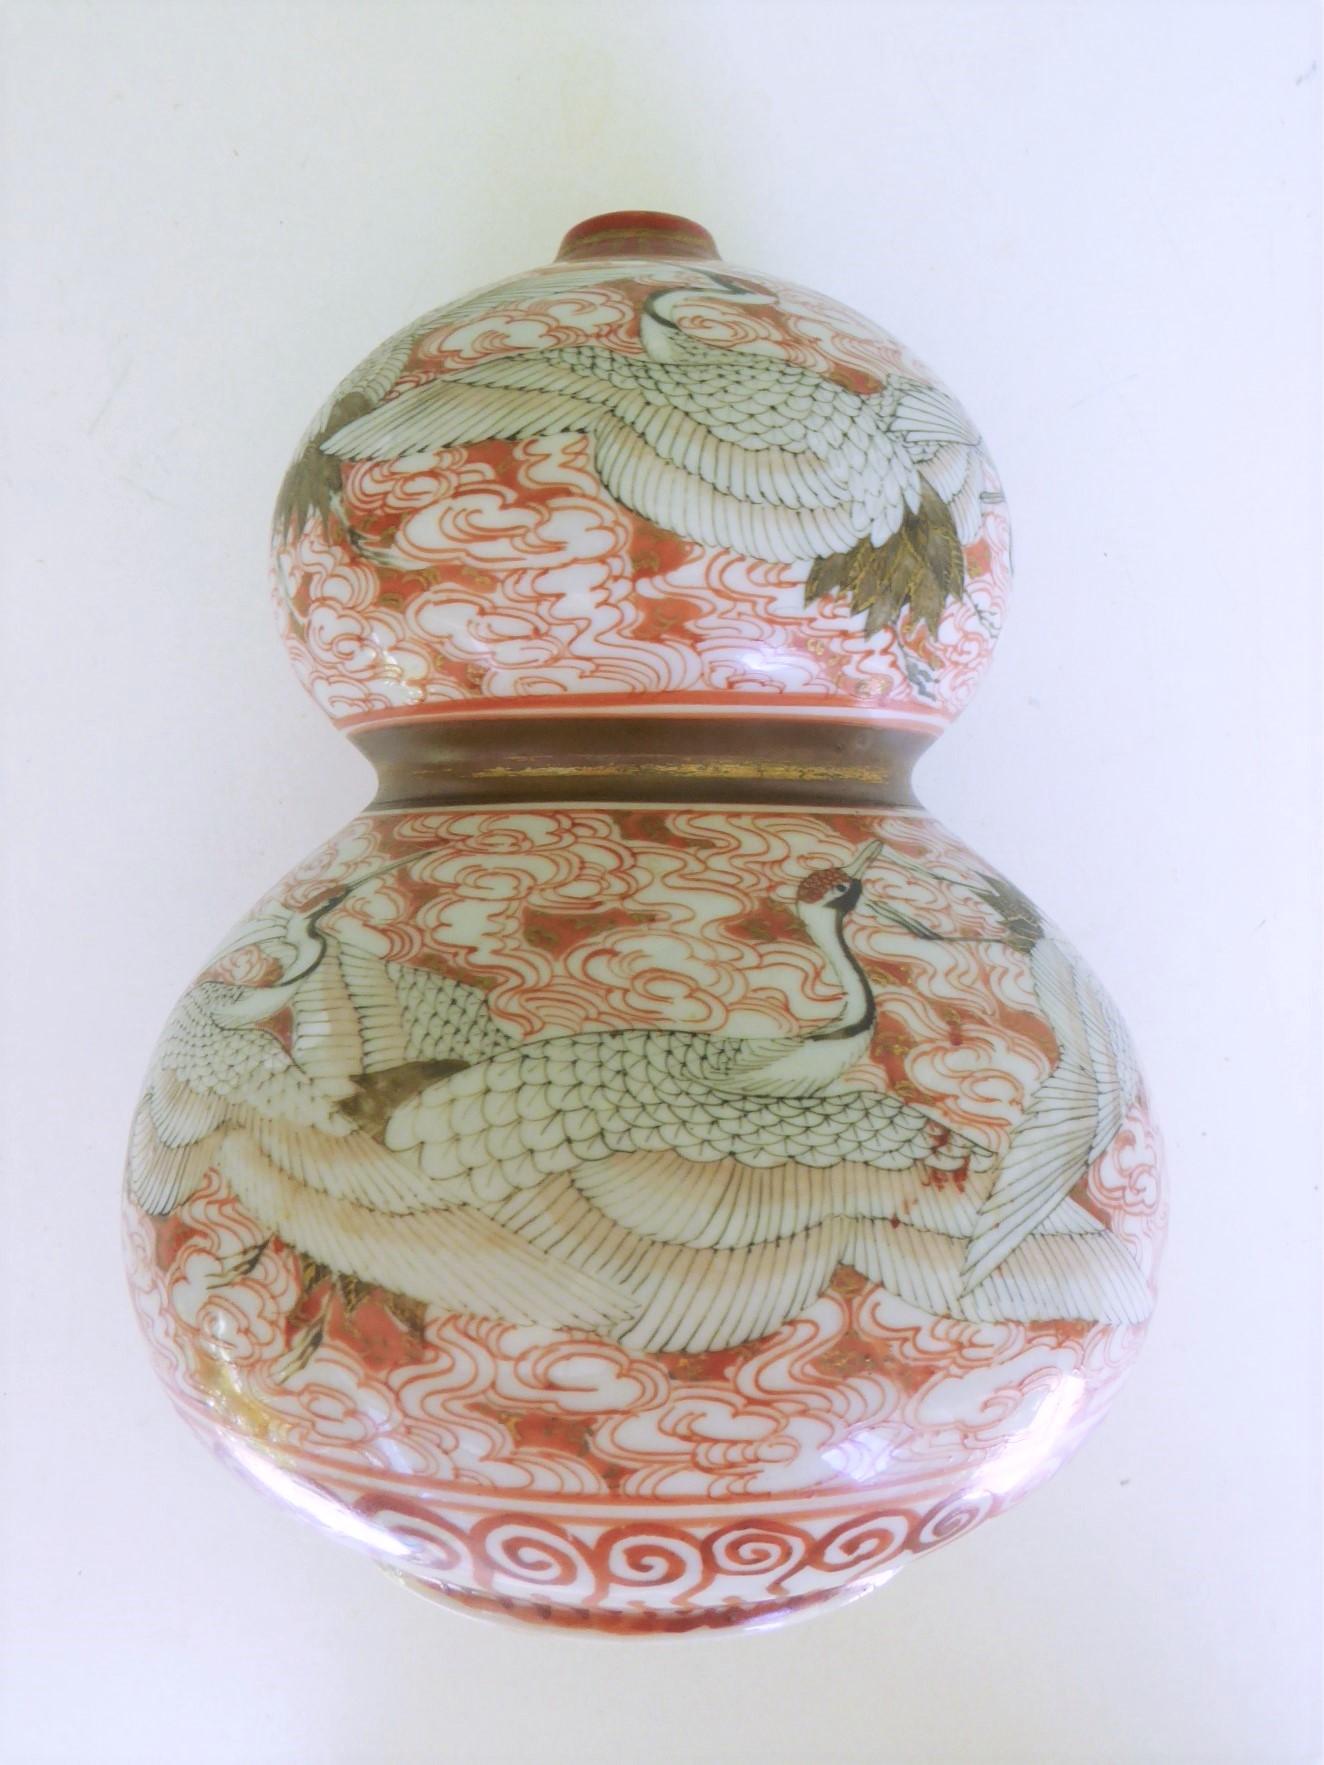 Japanese Gourd Shape Kutani Ceramic Vase with Cranes Decoration 1940s  In Good Condition For Sale In Miami, FL